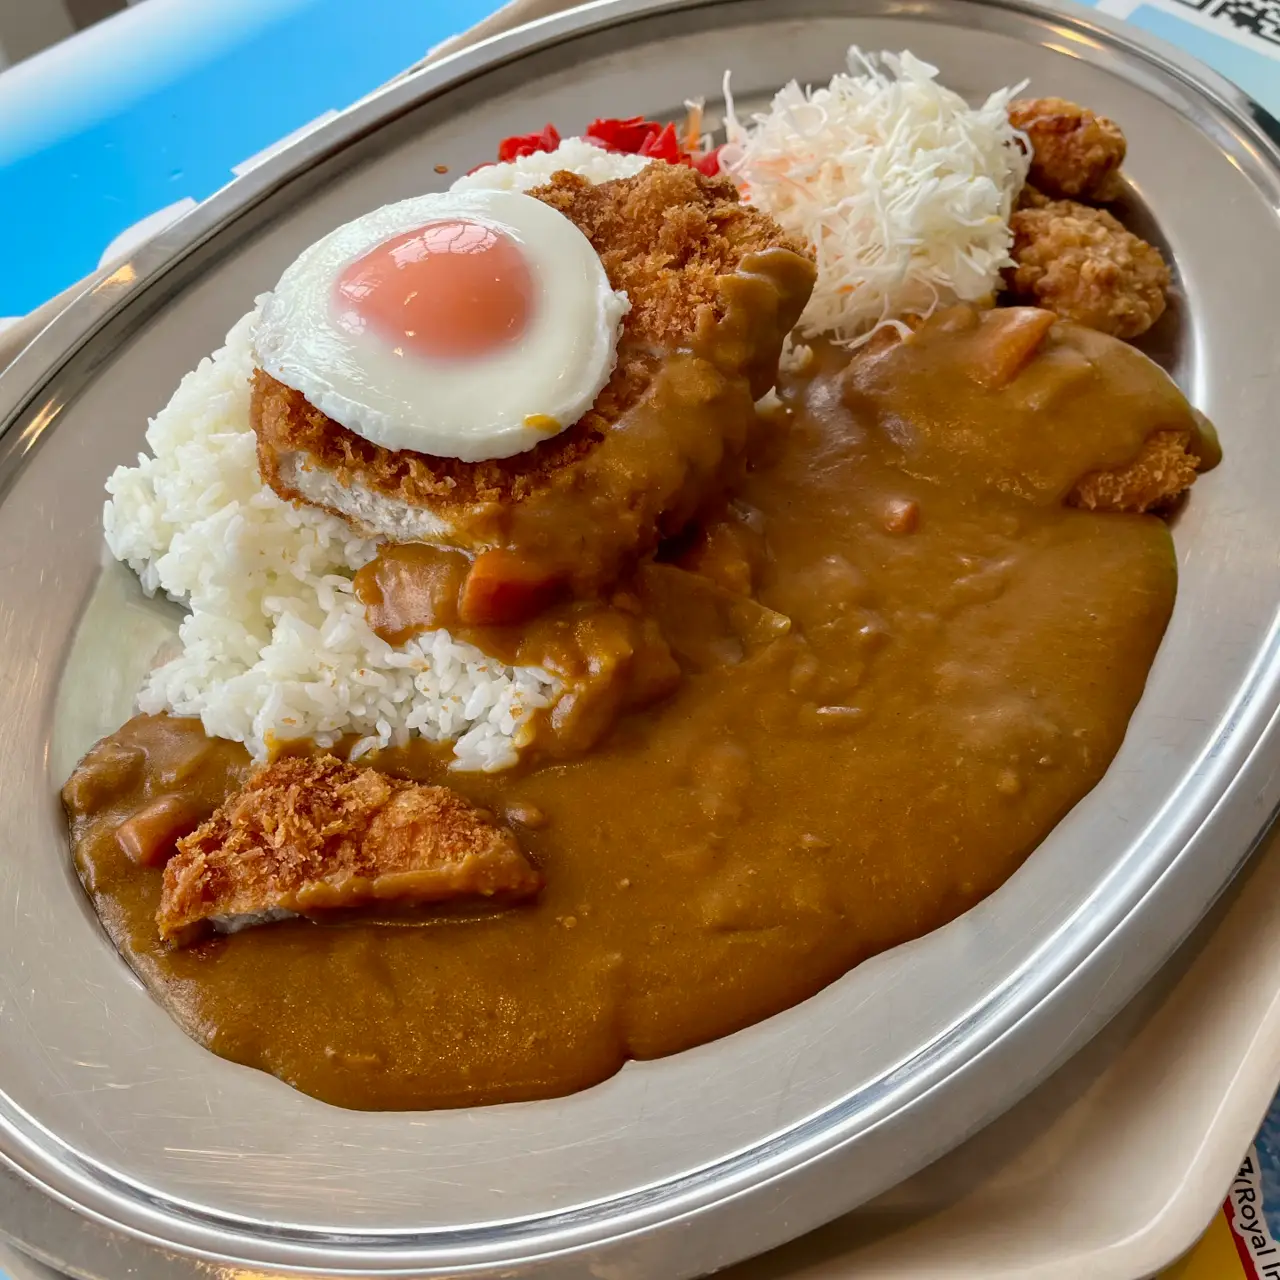 Had the King of Kamui today. An upsized curry rice…